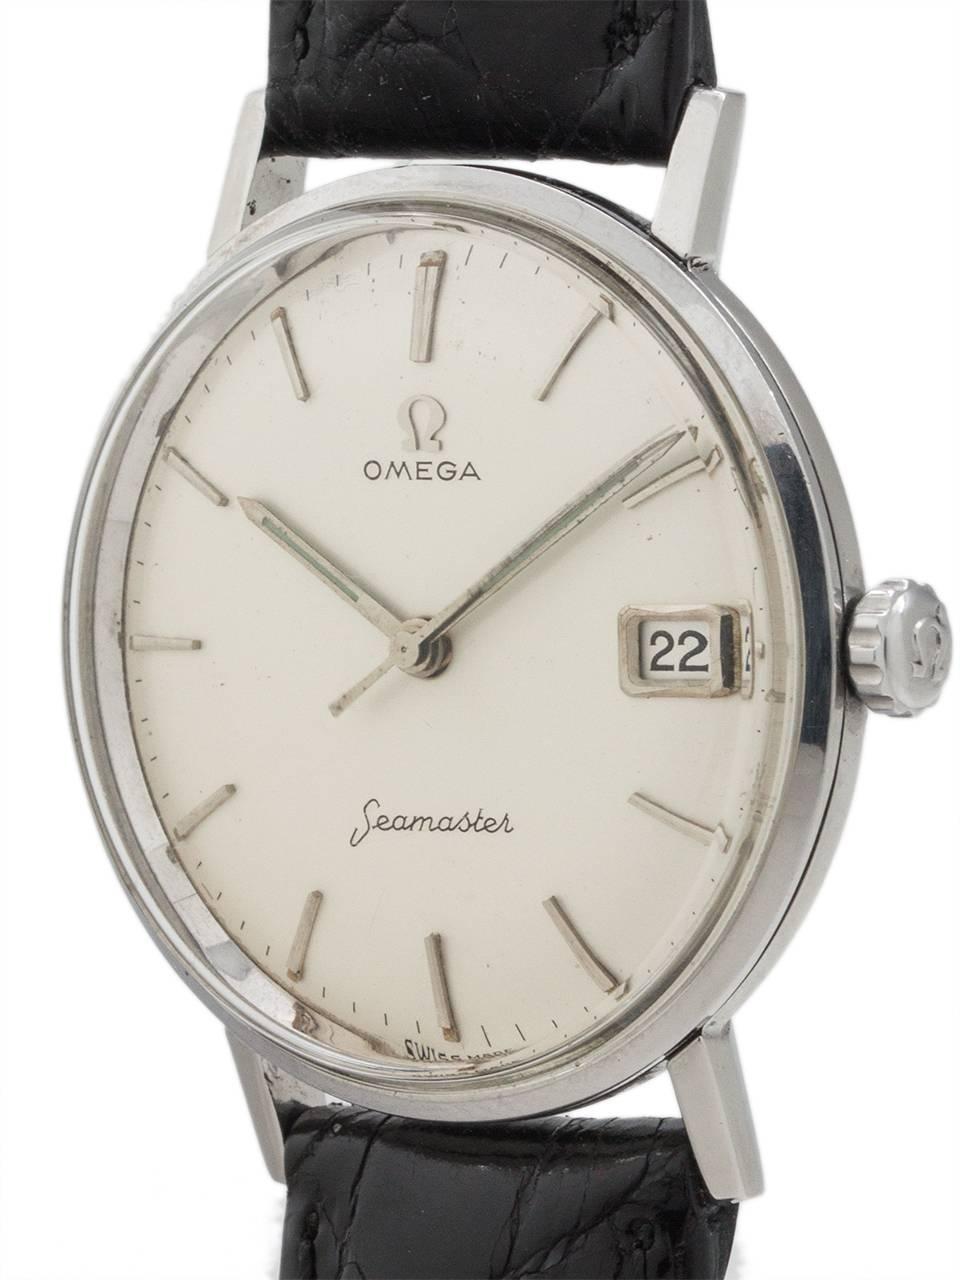 Omega Stainless Steel Seamaster Automatic Wristwatch Ref 14740, circa 1960 In Excellent Condition For Sale In West Hollywood, CA